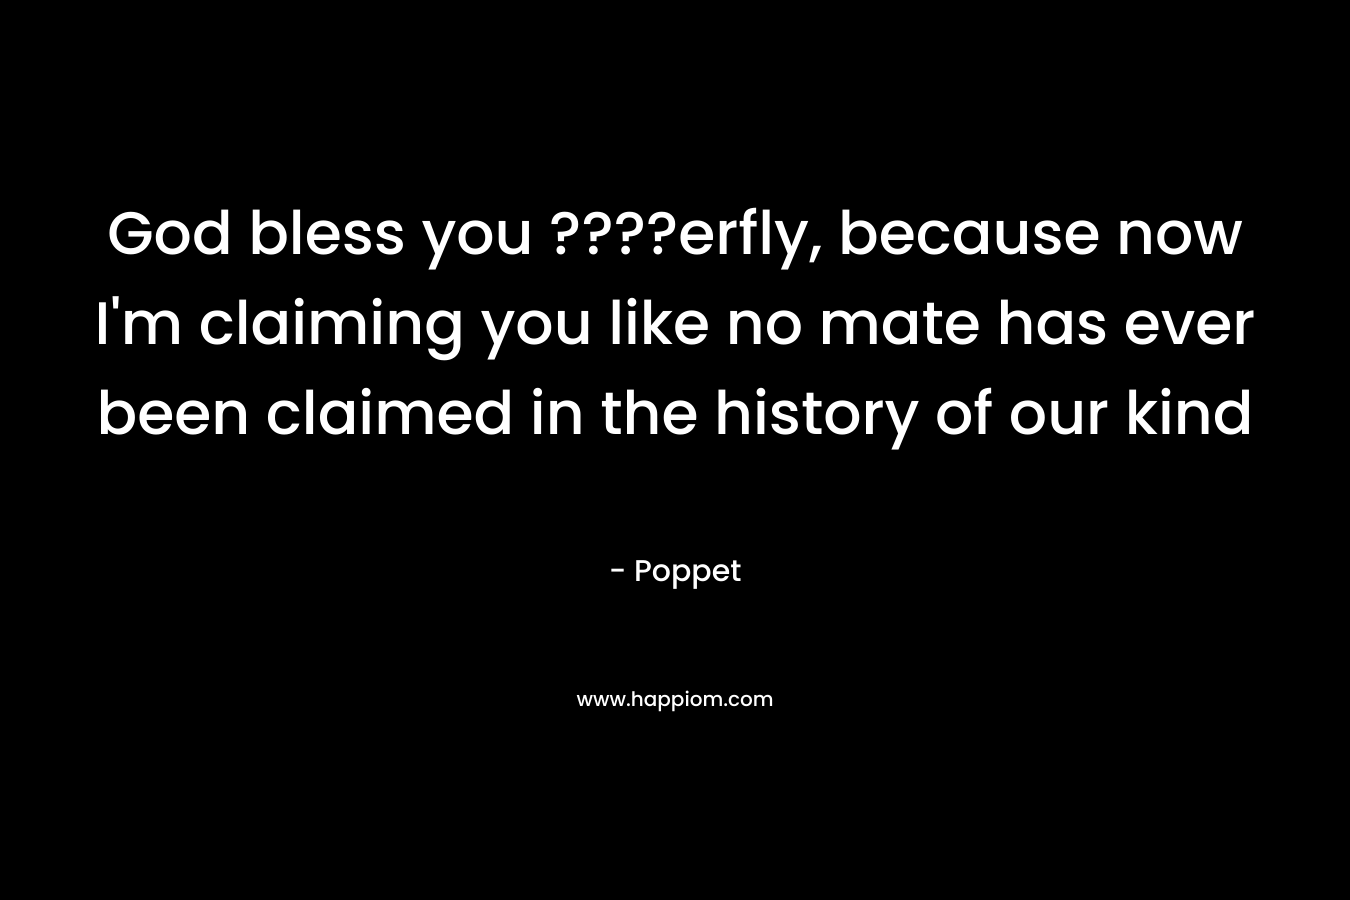 God bless you ????erfly, because now I’m claiming you like no mate has ever been claimed in the history of our kind – Poppet